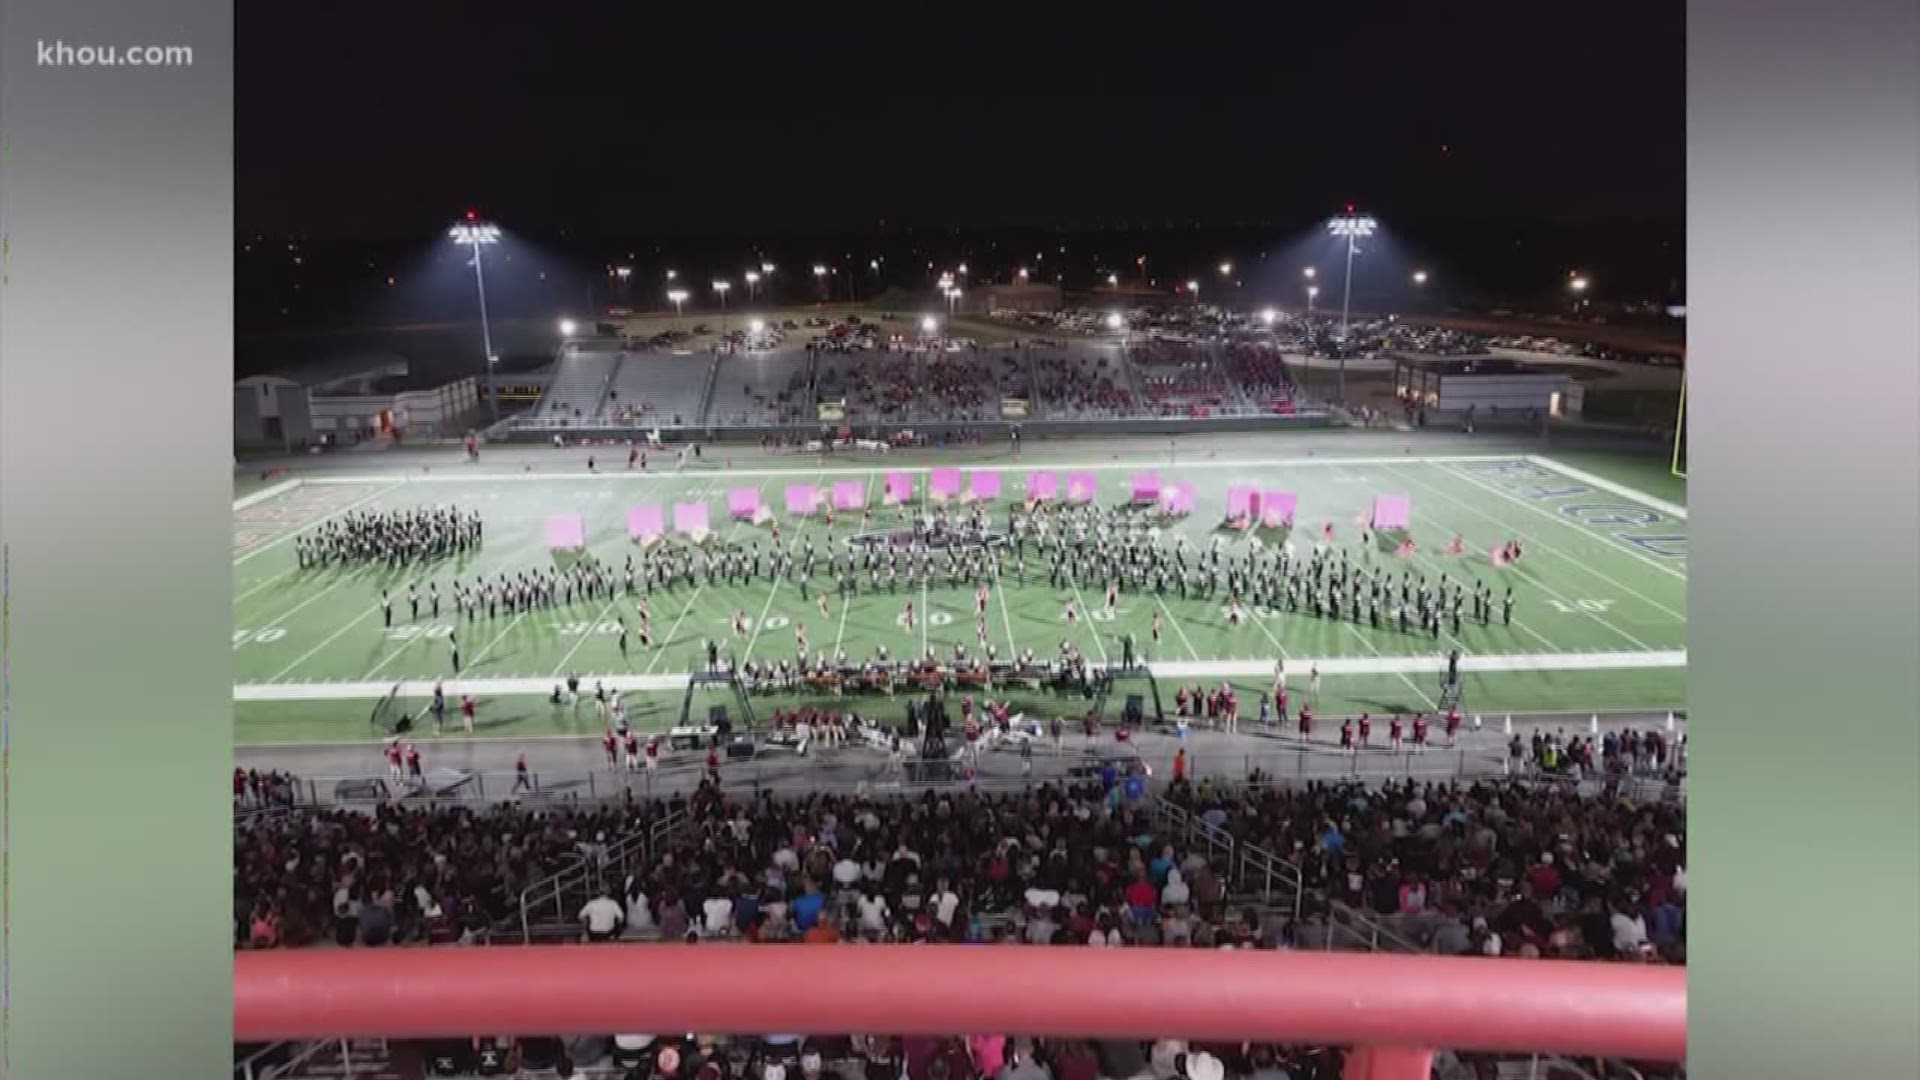 The Pearland High School marching band earned a spot in the 2020 Rose Parade.